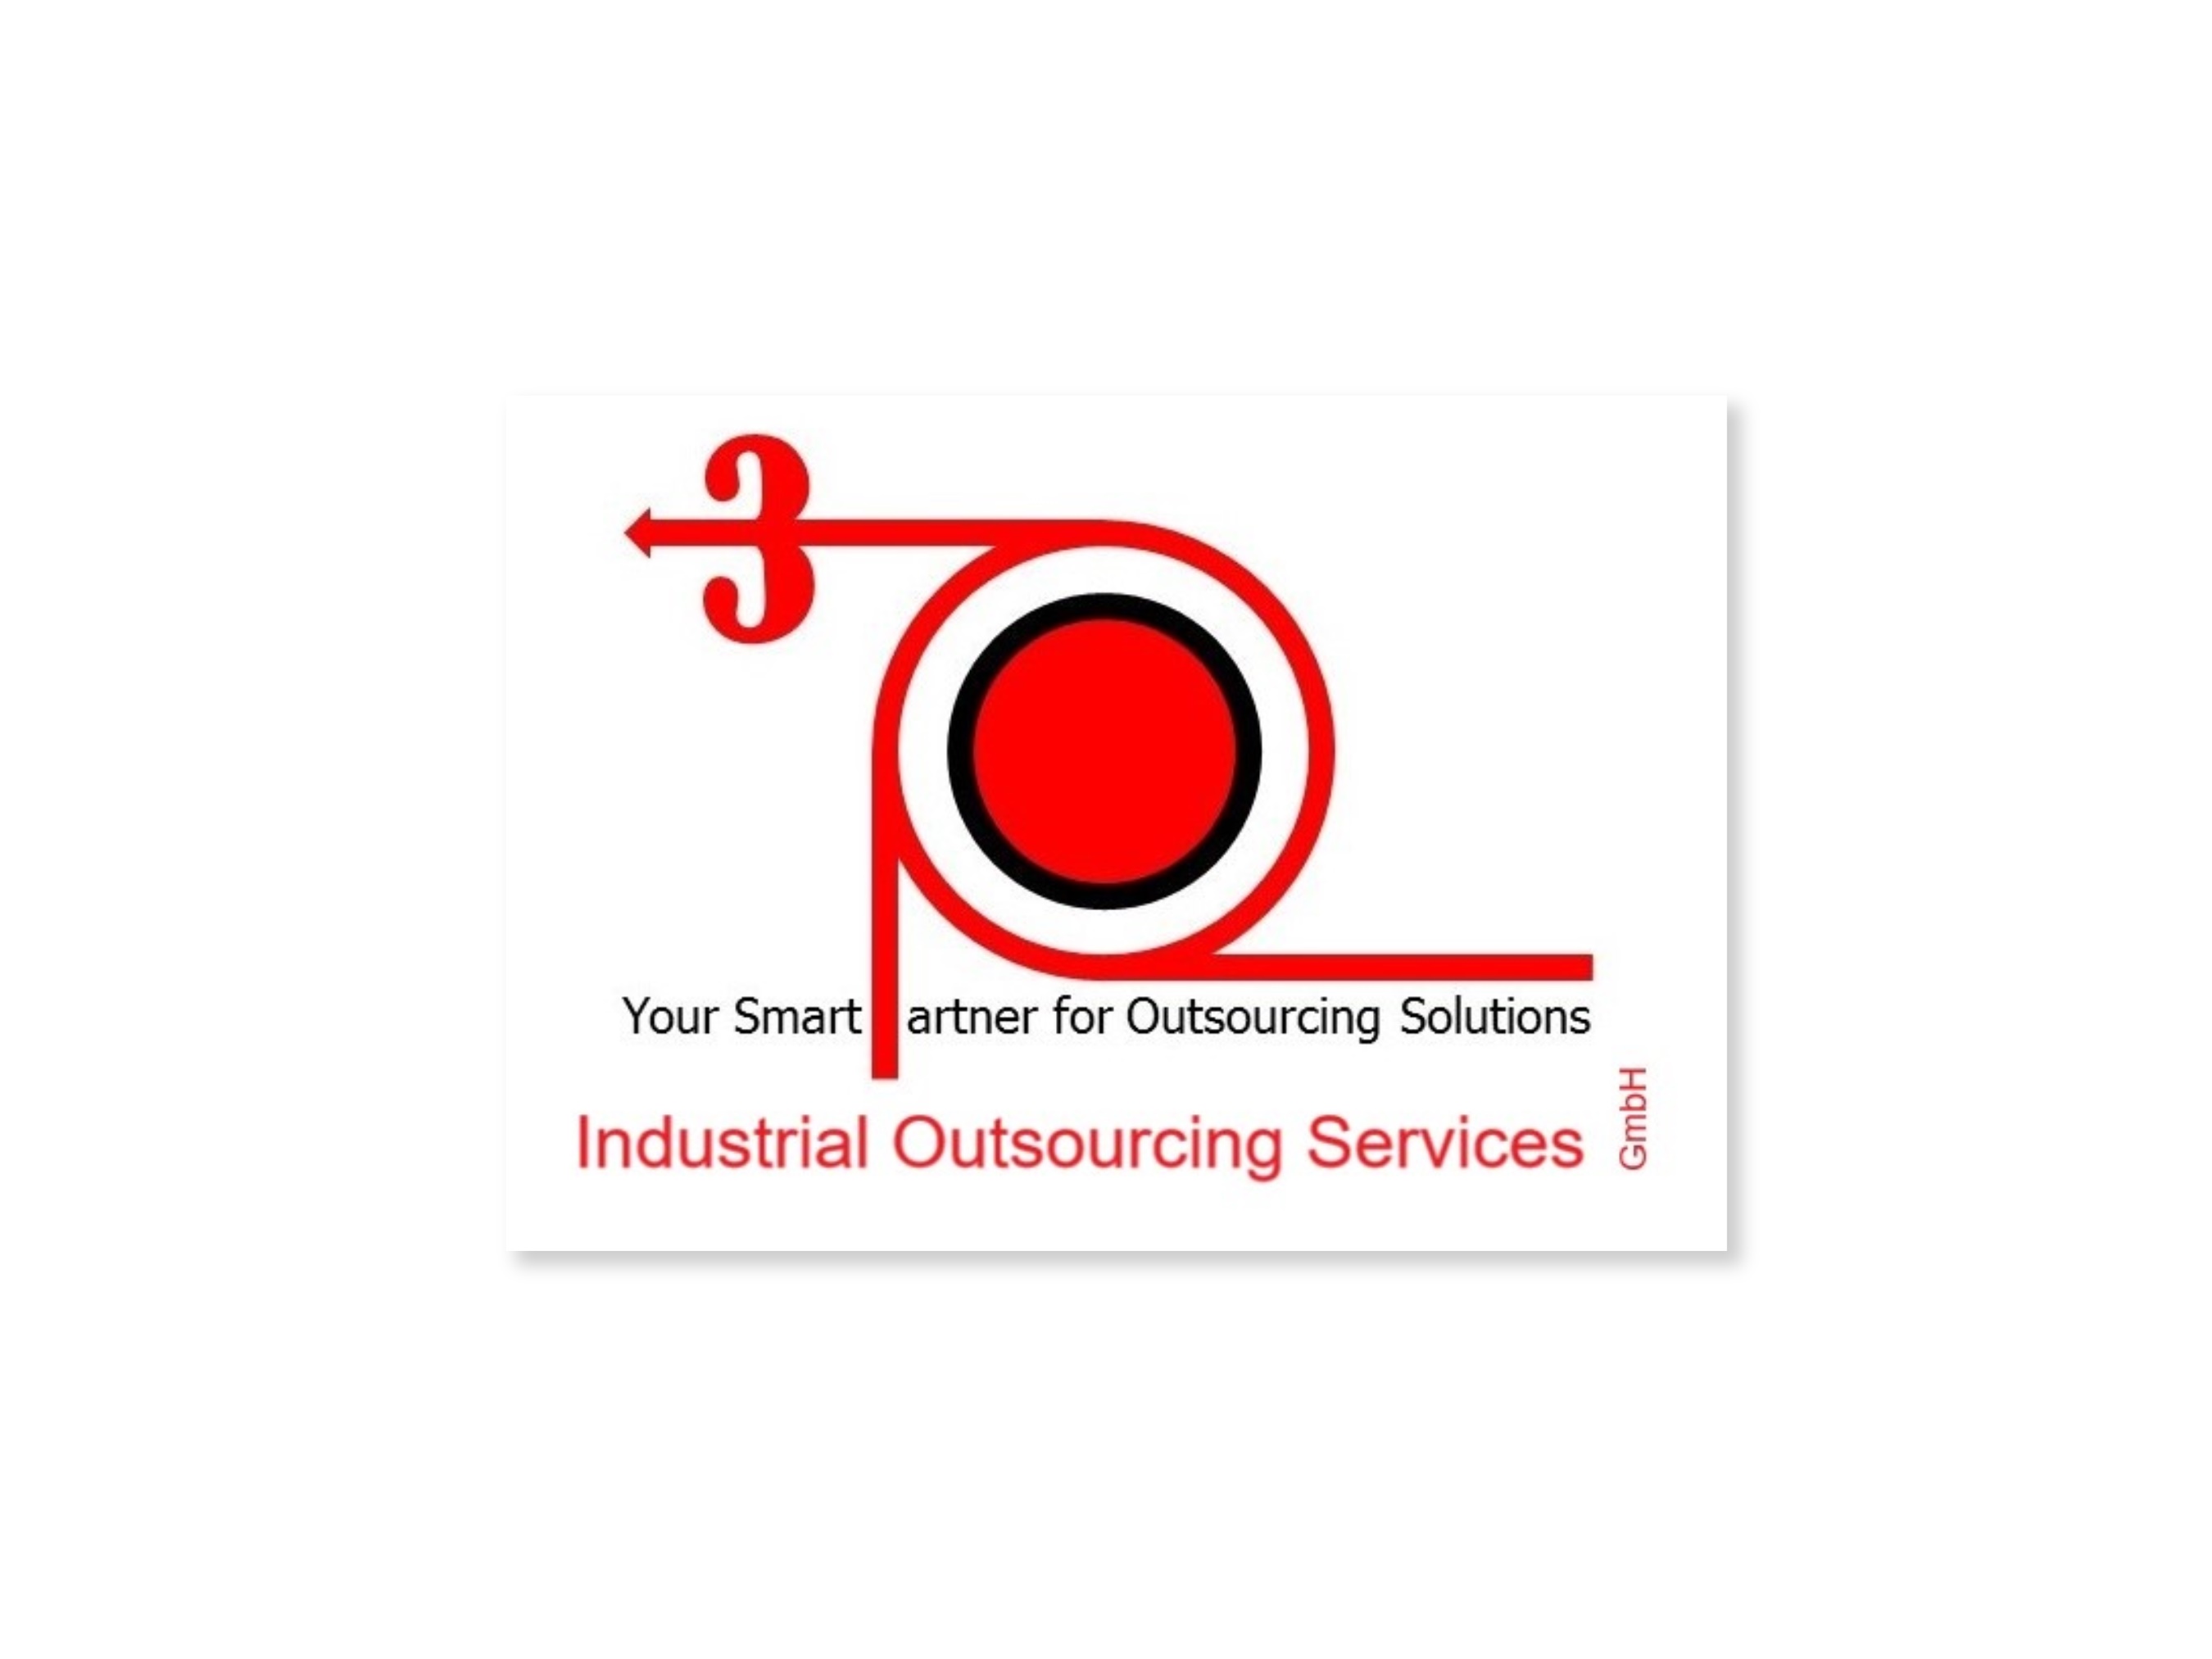 Logo 3P Industrial Outsourcing Services GmbH